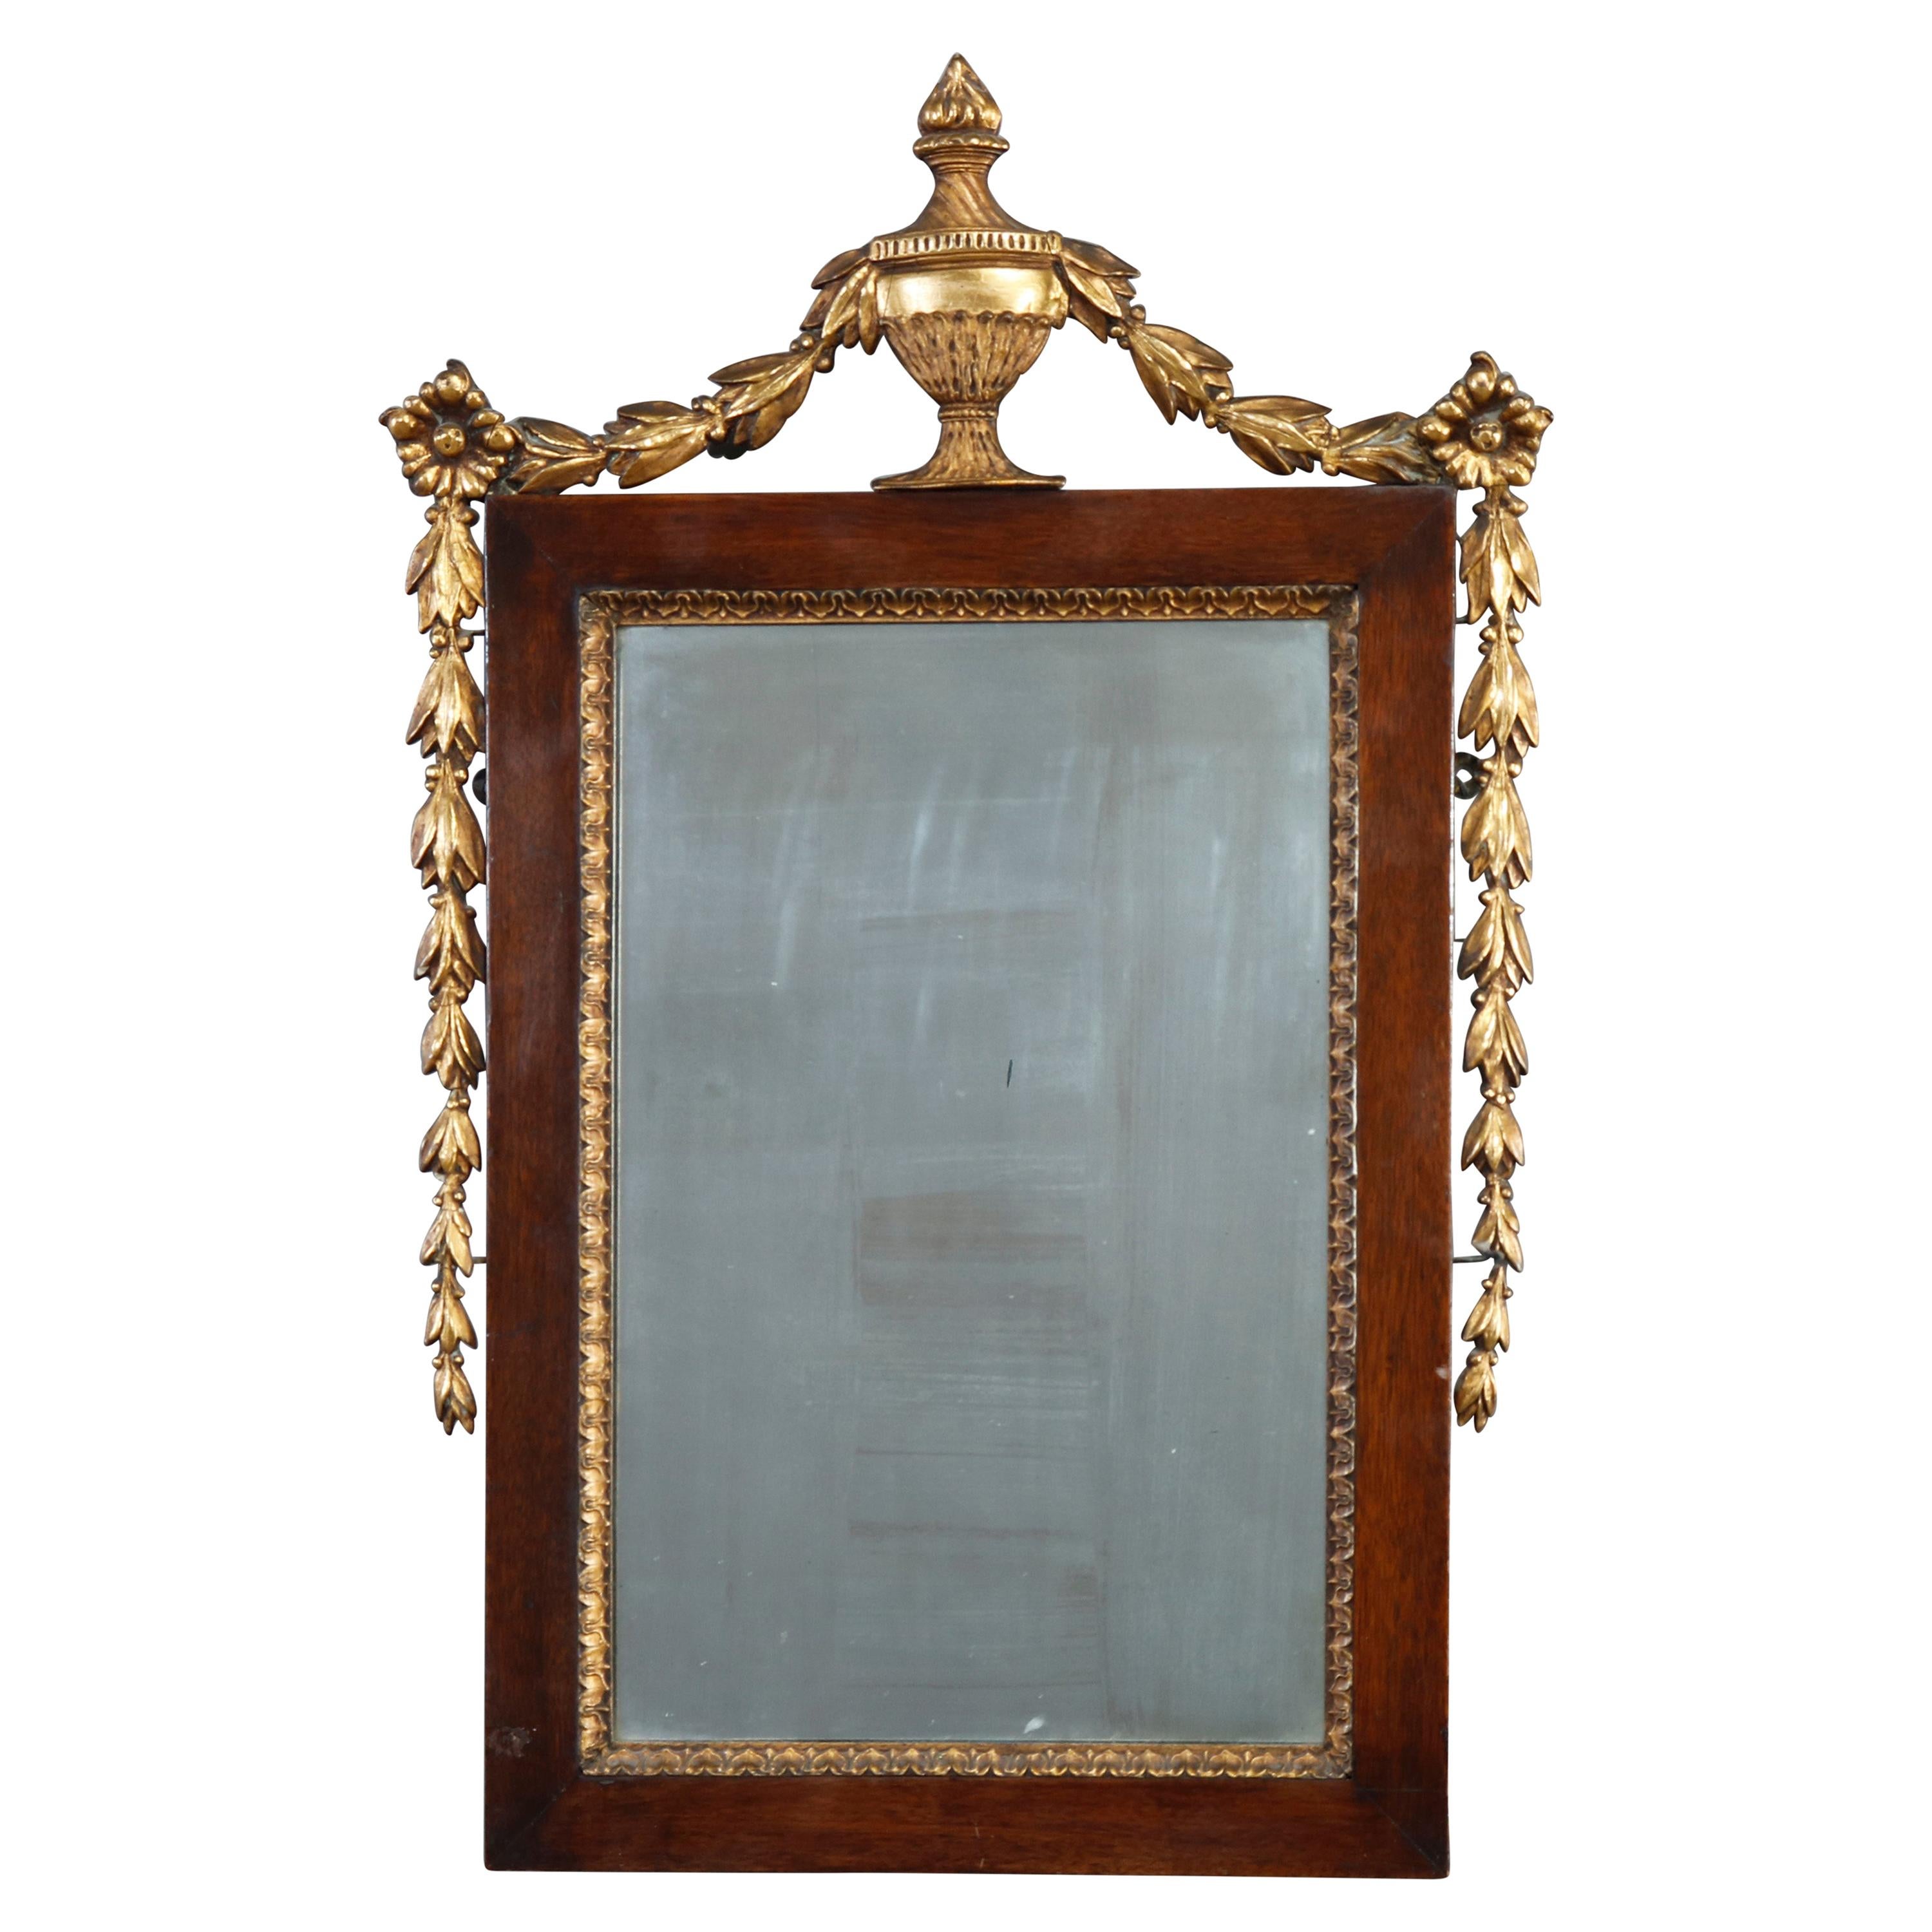 Antique French Neoclassical Mahogany & Giltwood Wall Mirror, Circa 1840 For Sale